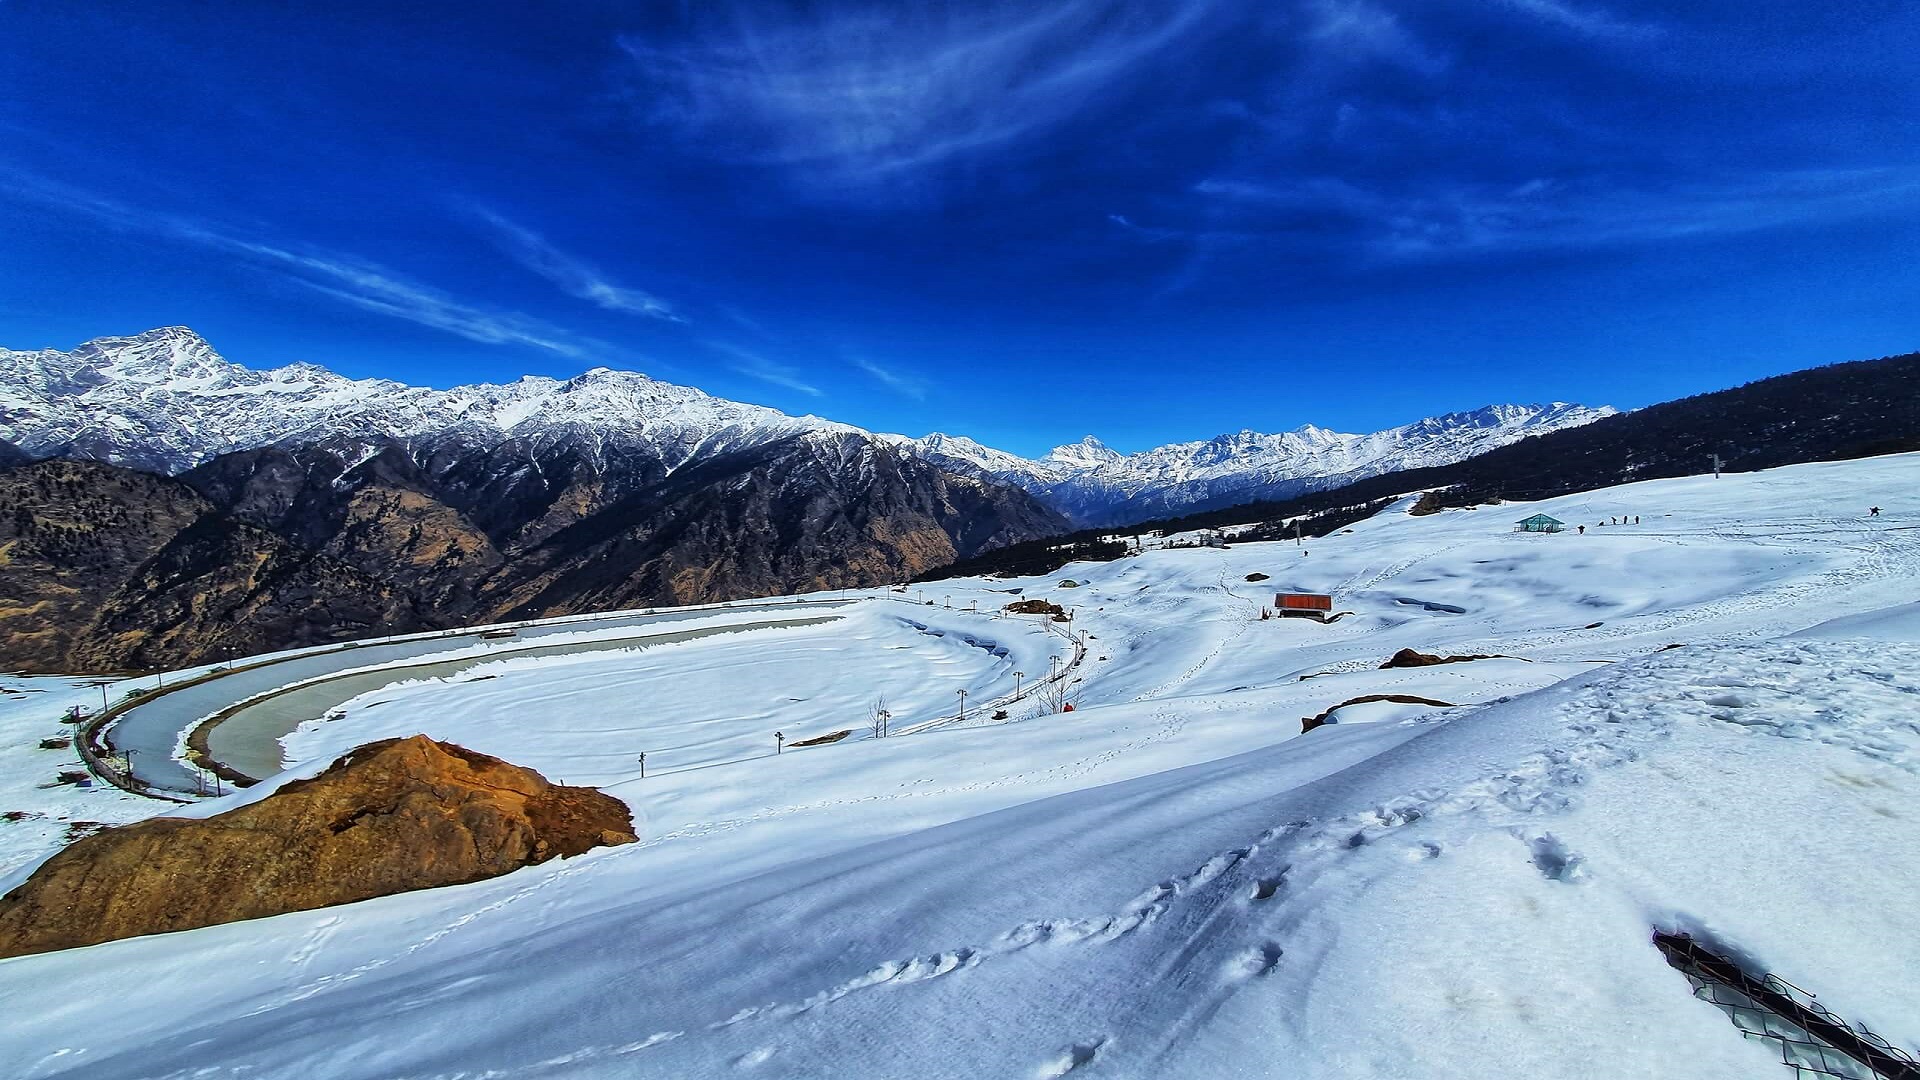 Top 11 Hill stations in India have snowfall